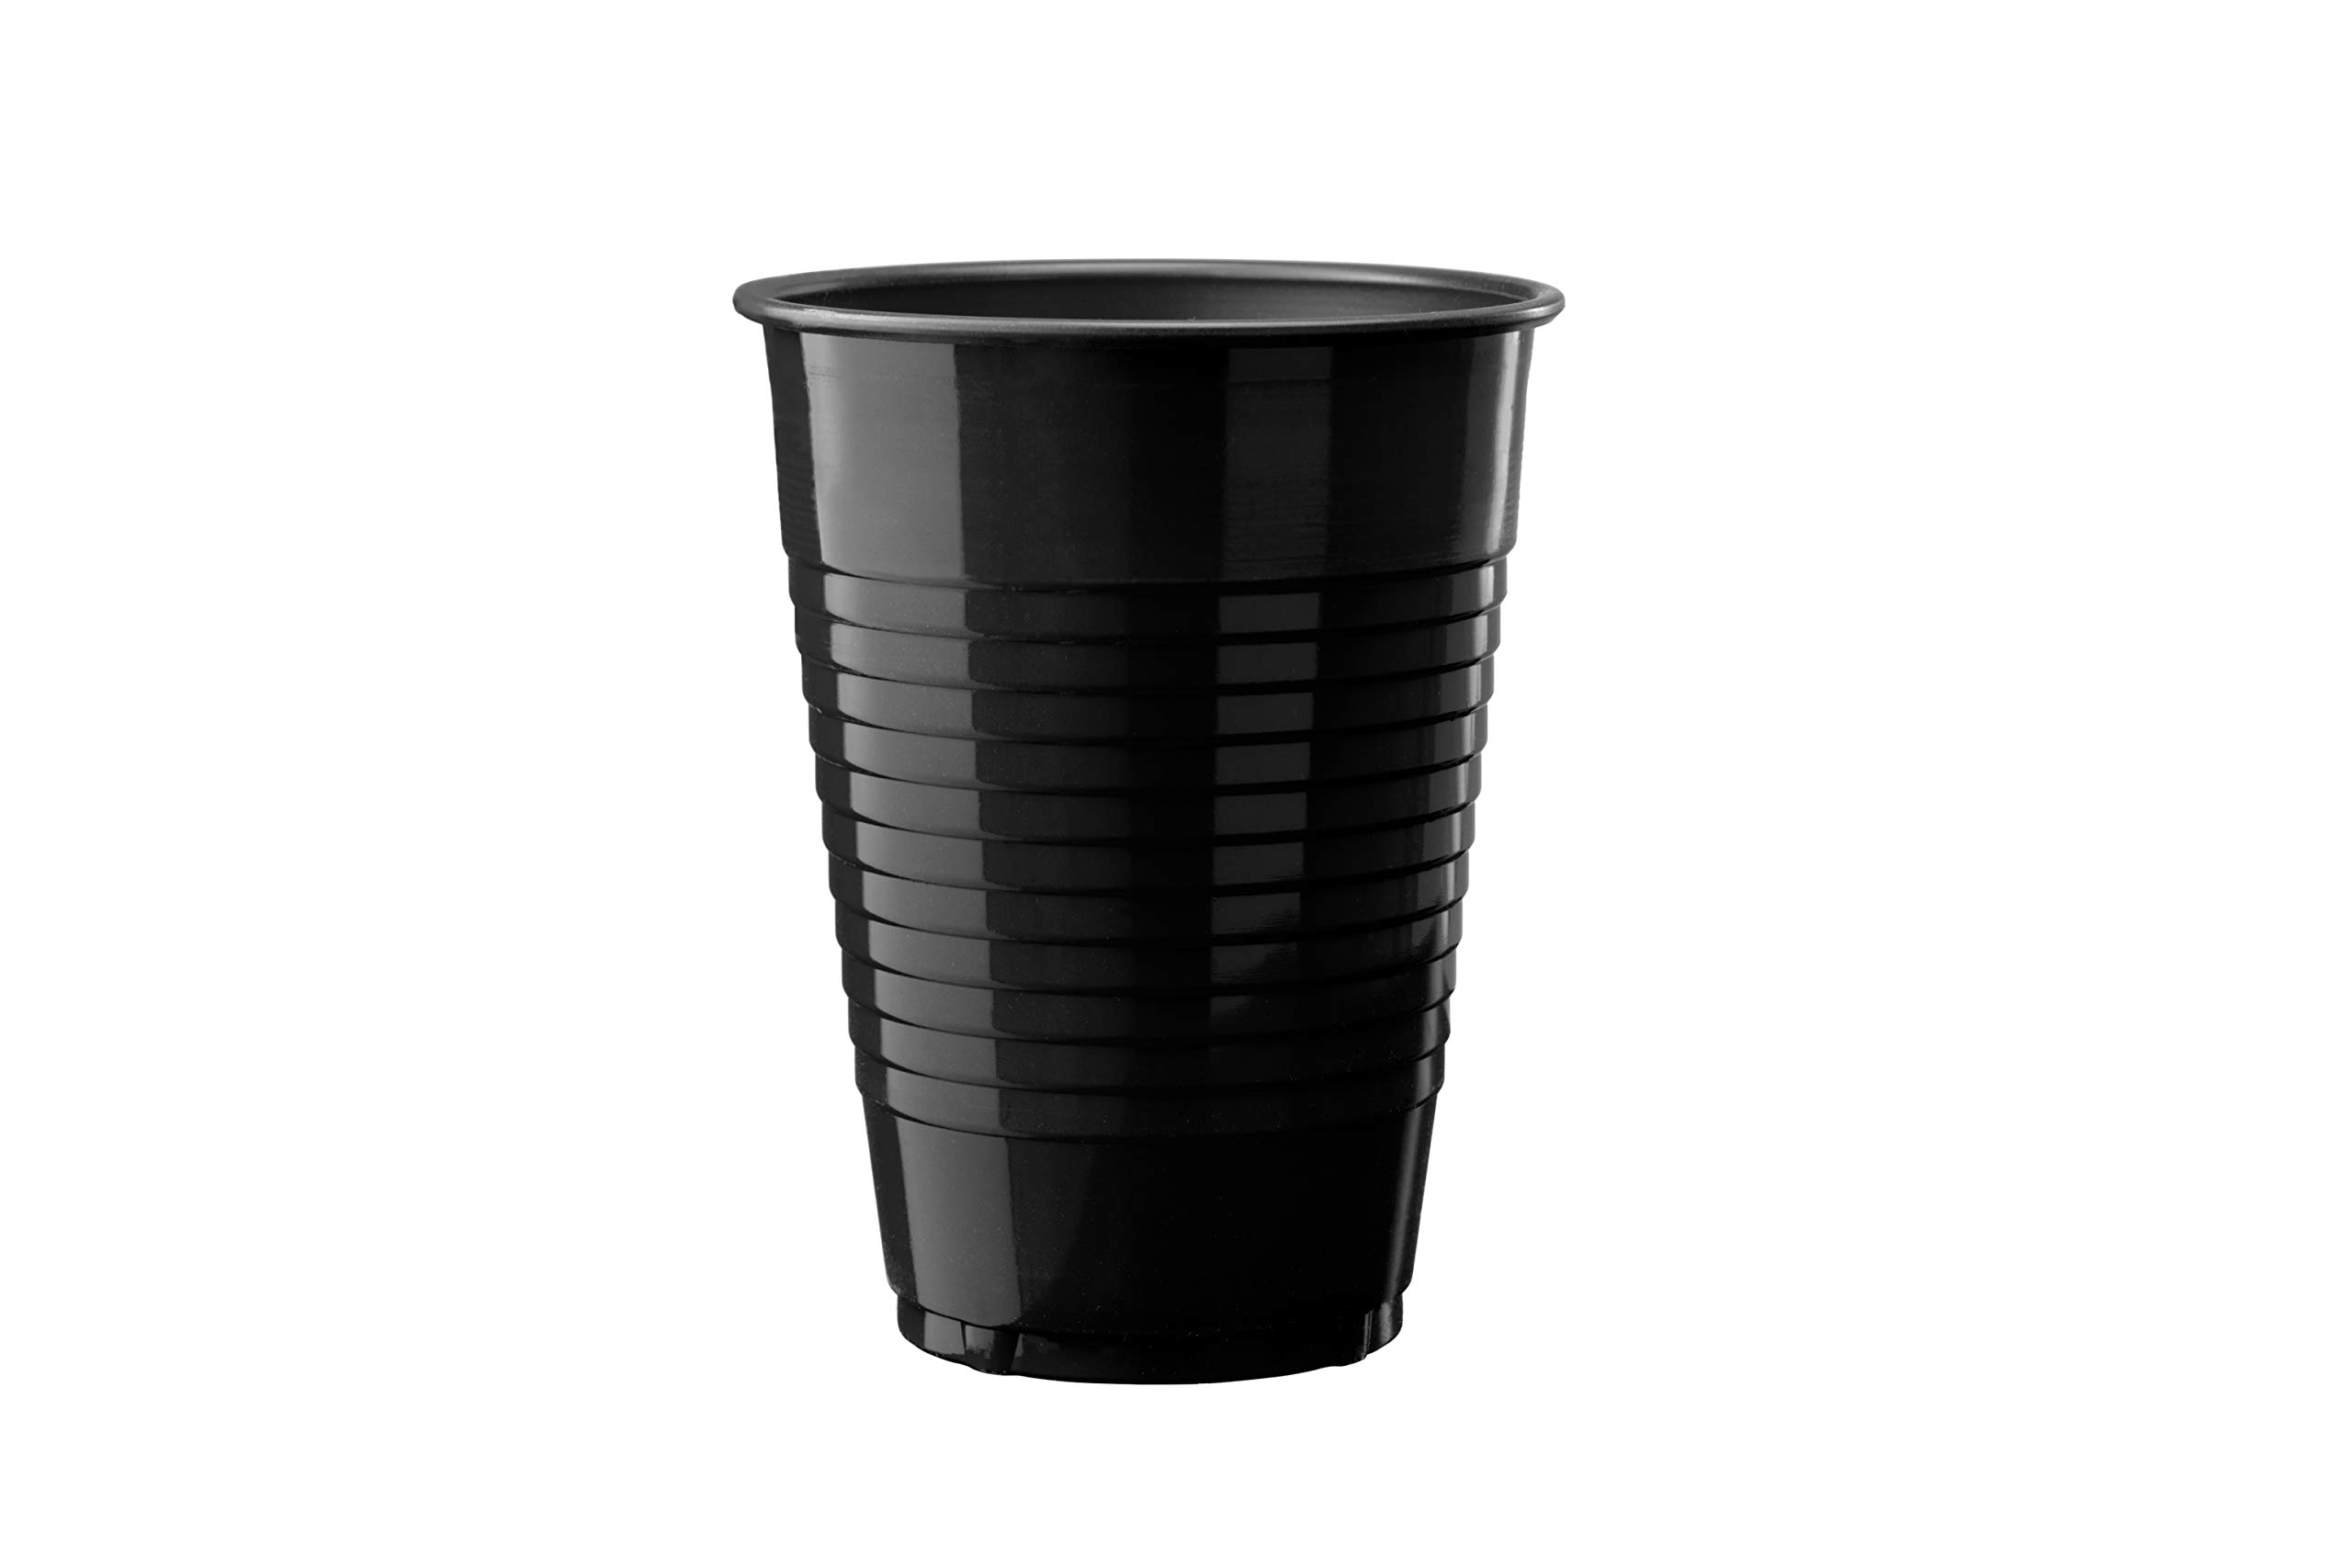 True Black Party Cups, Disposable Cups, Drink Cups for Cocktails and Beer,  16 Ounce Capacity, Plastic, Black, Set of 50